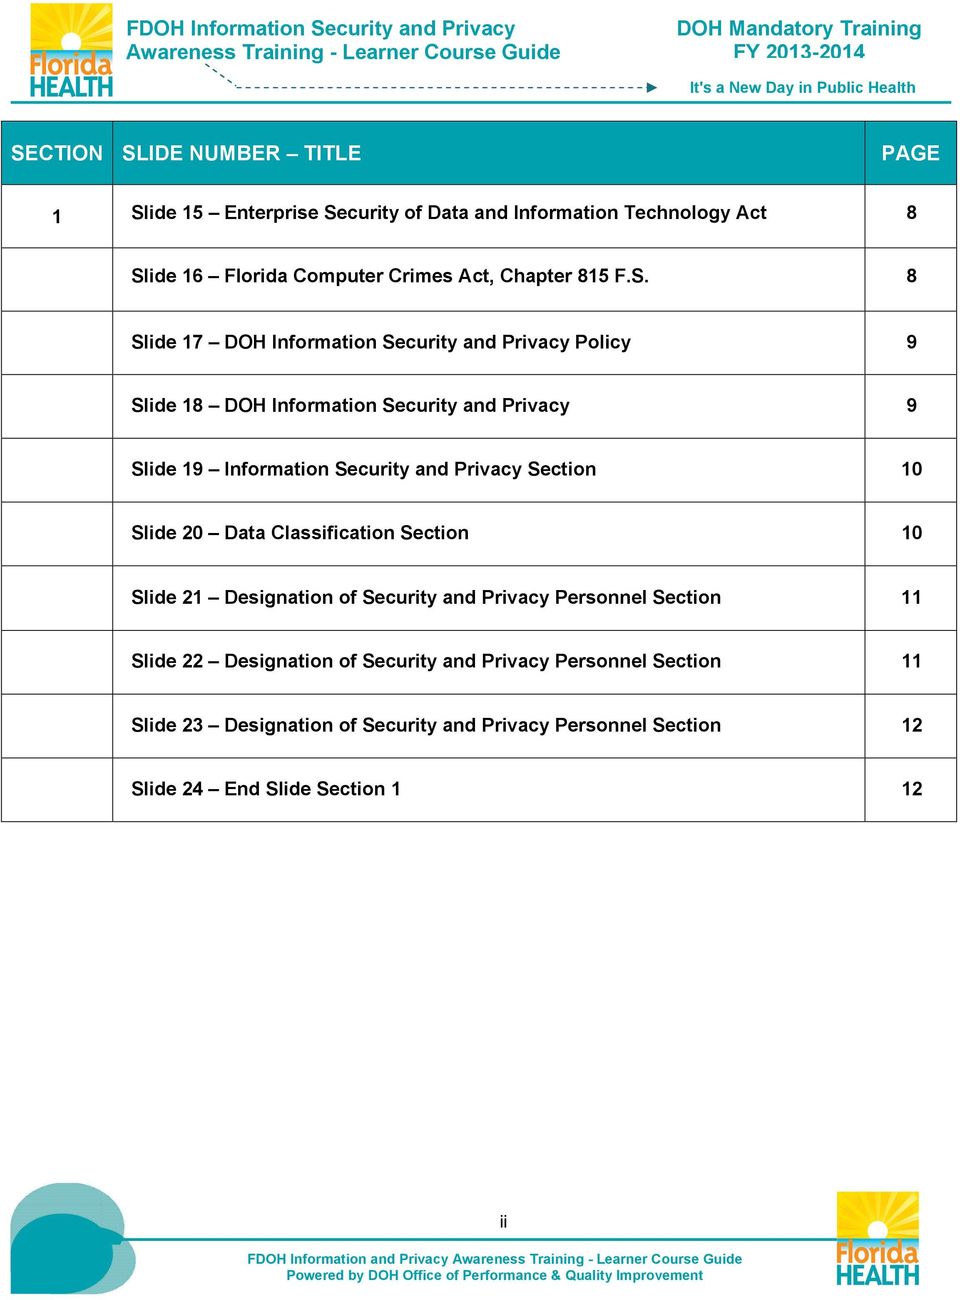 Section 10 Slide 20 Data Classification Section 10 Slide 21 Designation of Security and Privacy Personnel Section 11 Slide 22 Designation of Security and